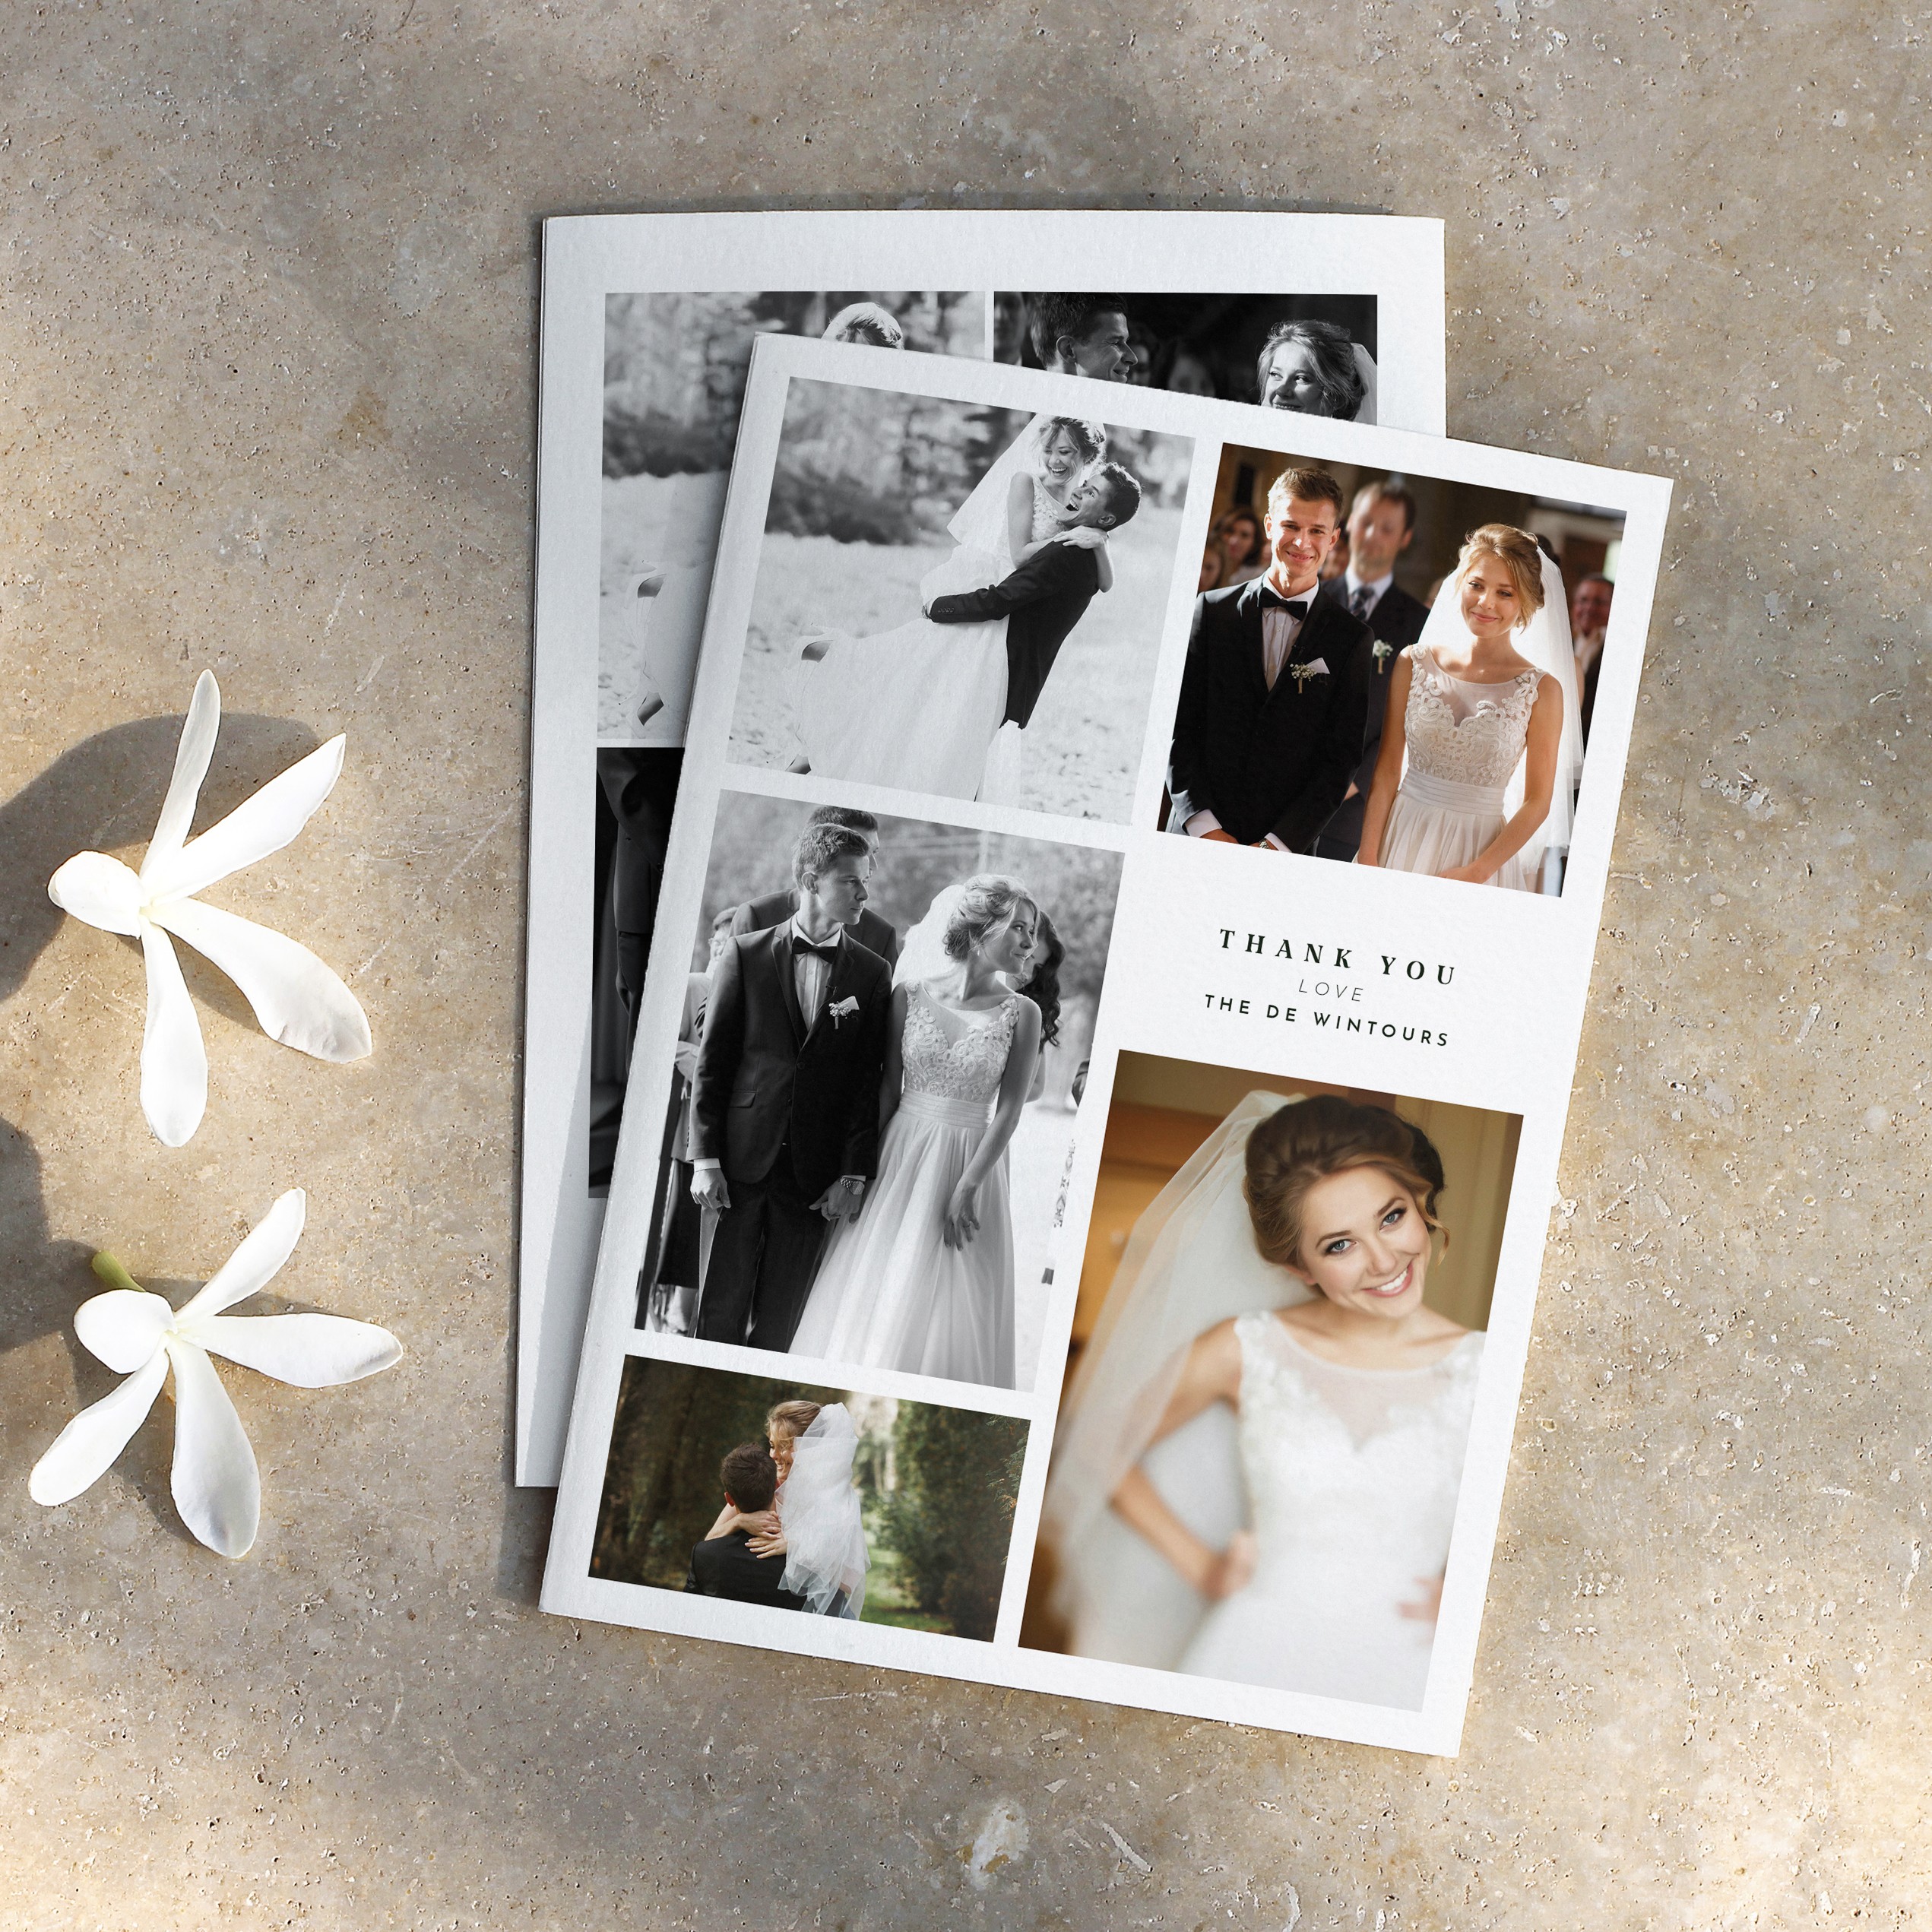 A5 portrait wedding thank you card with 5 photos in full color